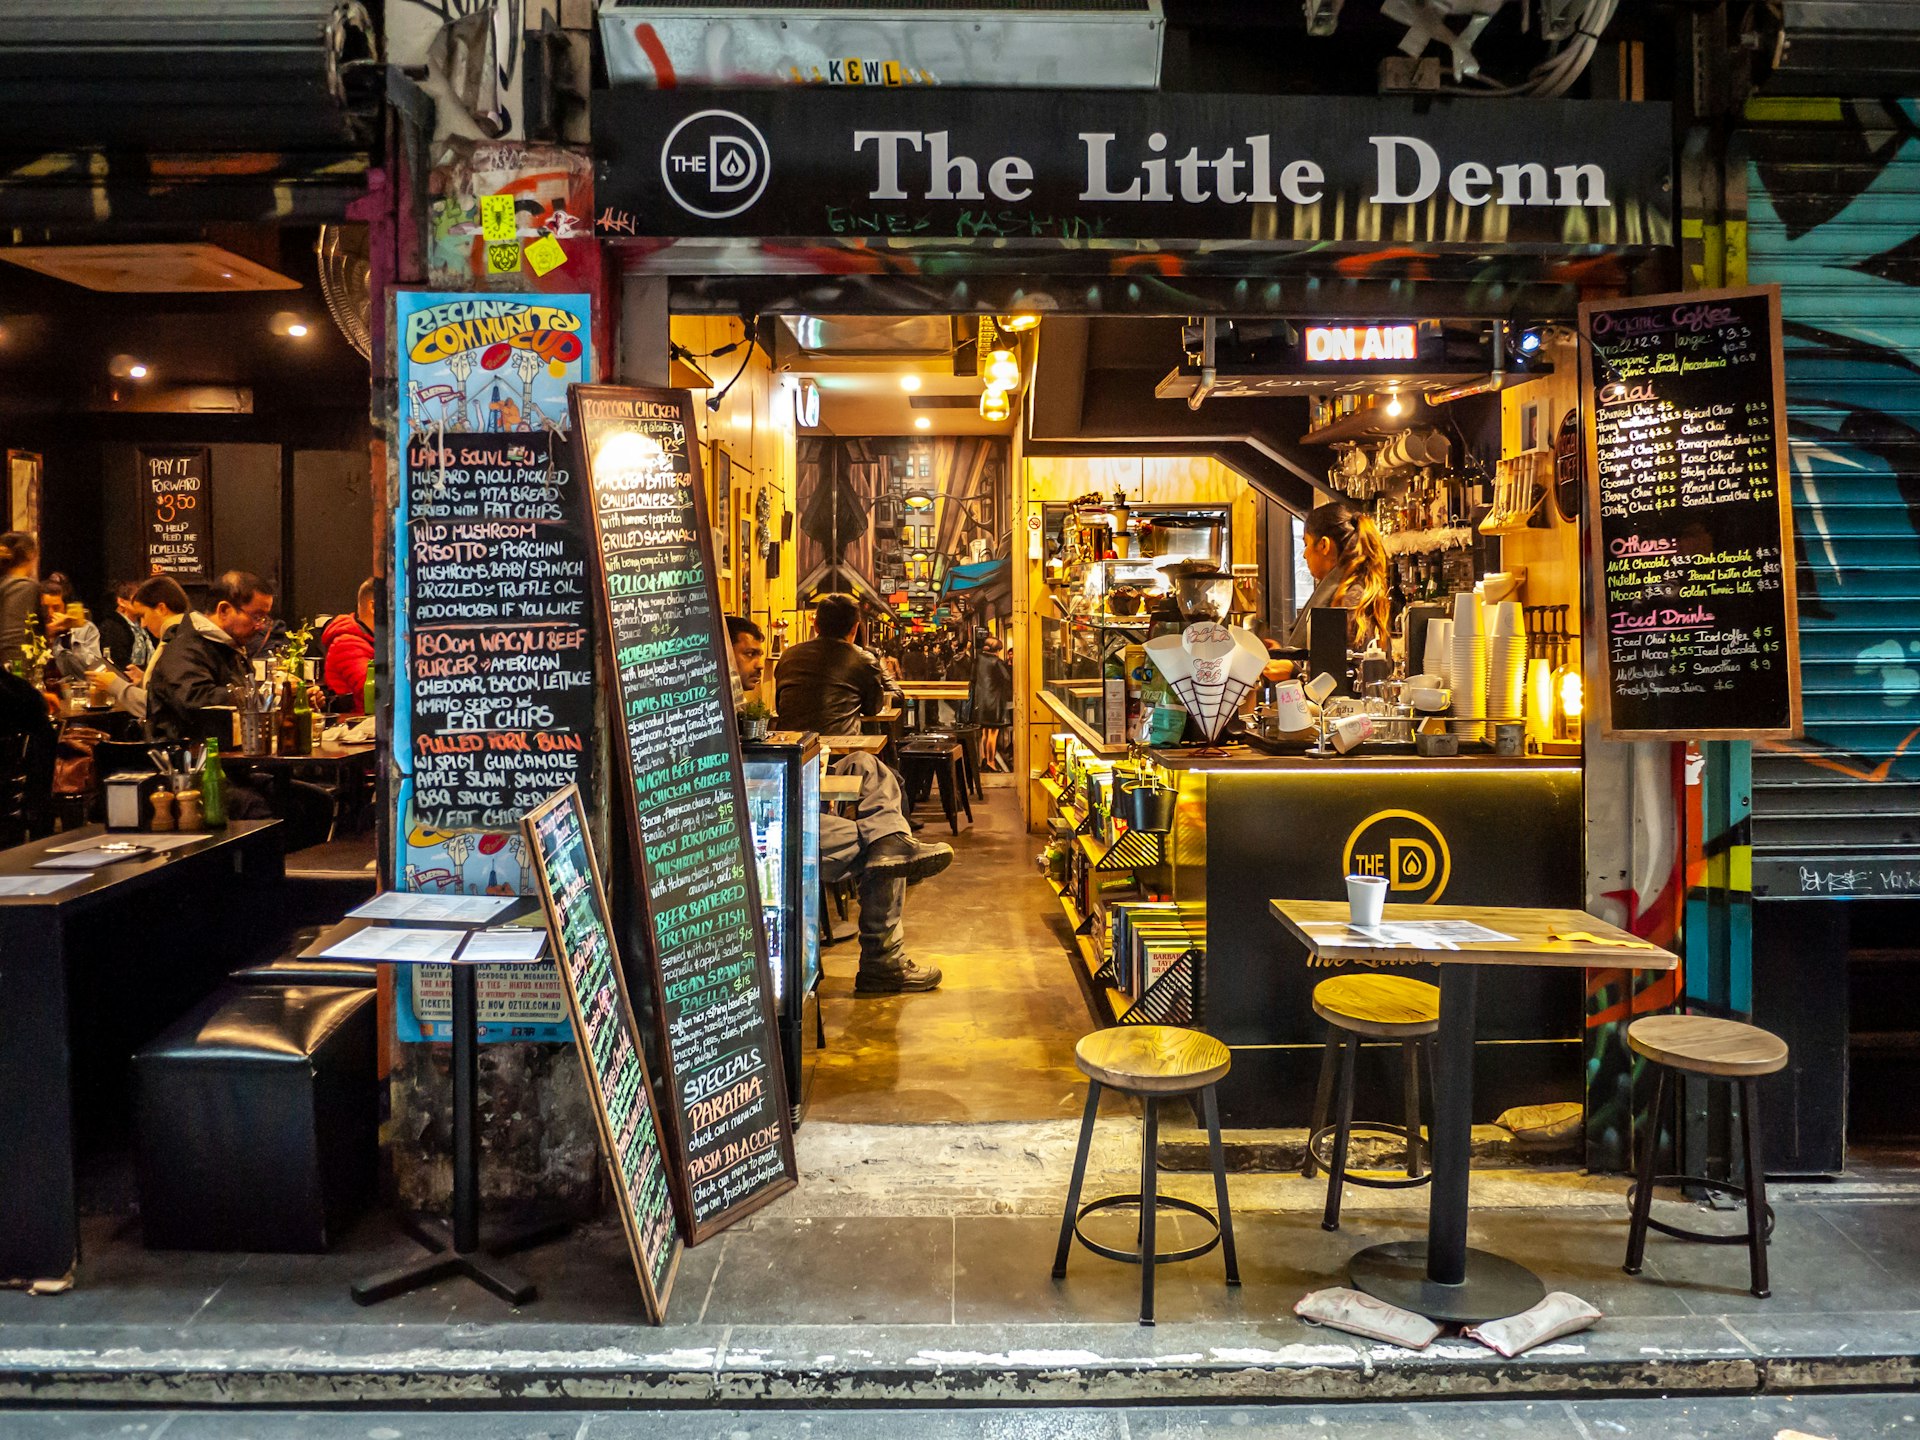 The Little Denn cafe in Centre Place